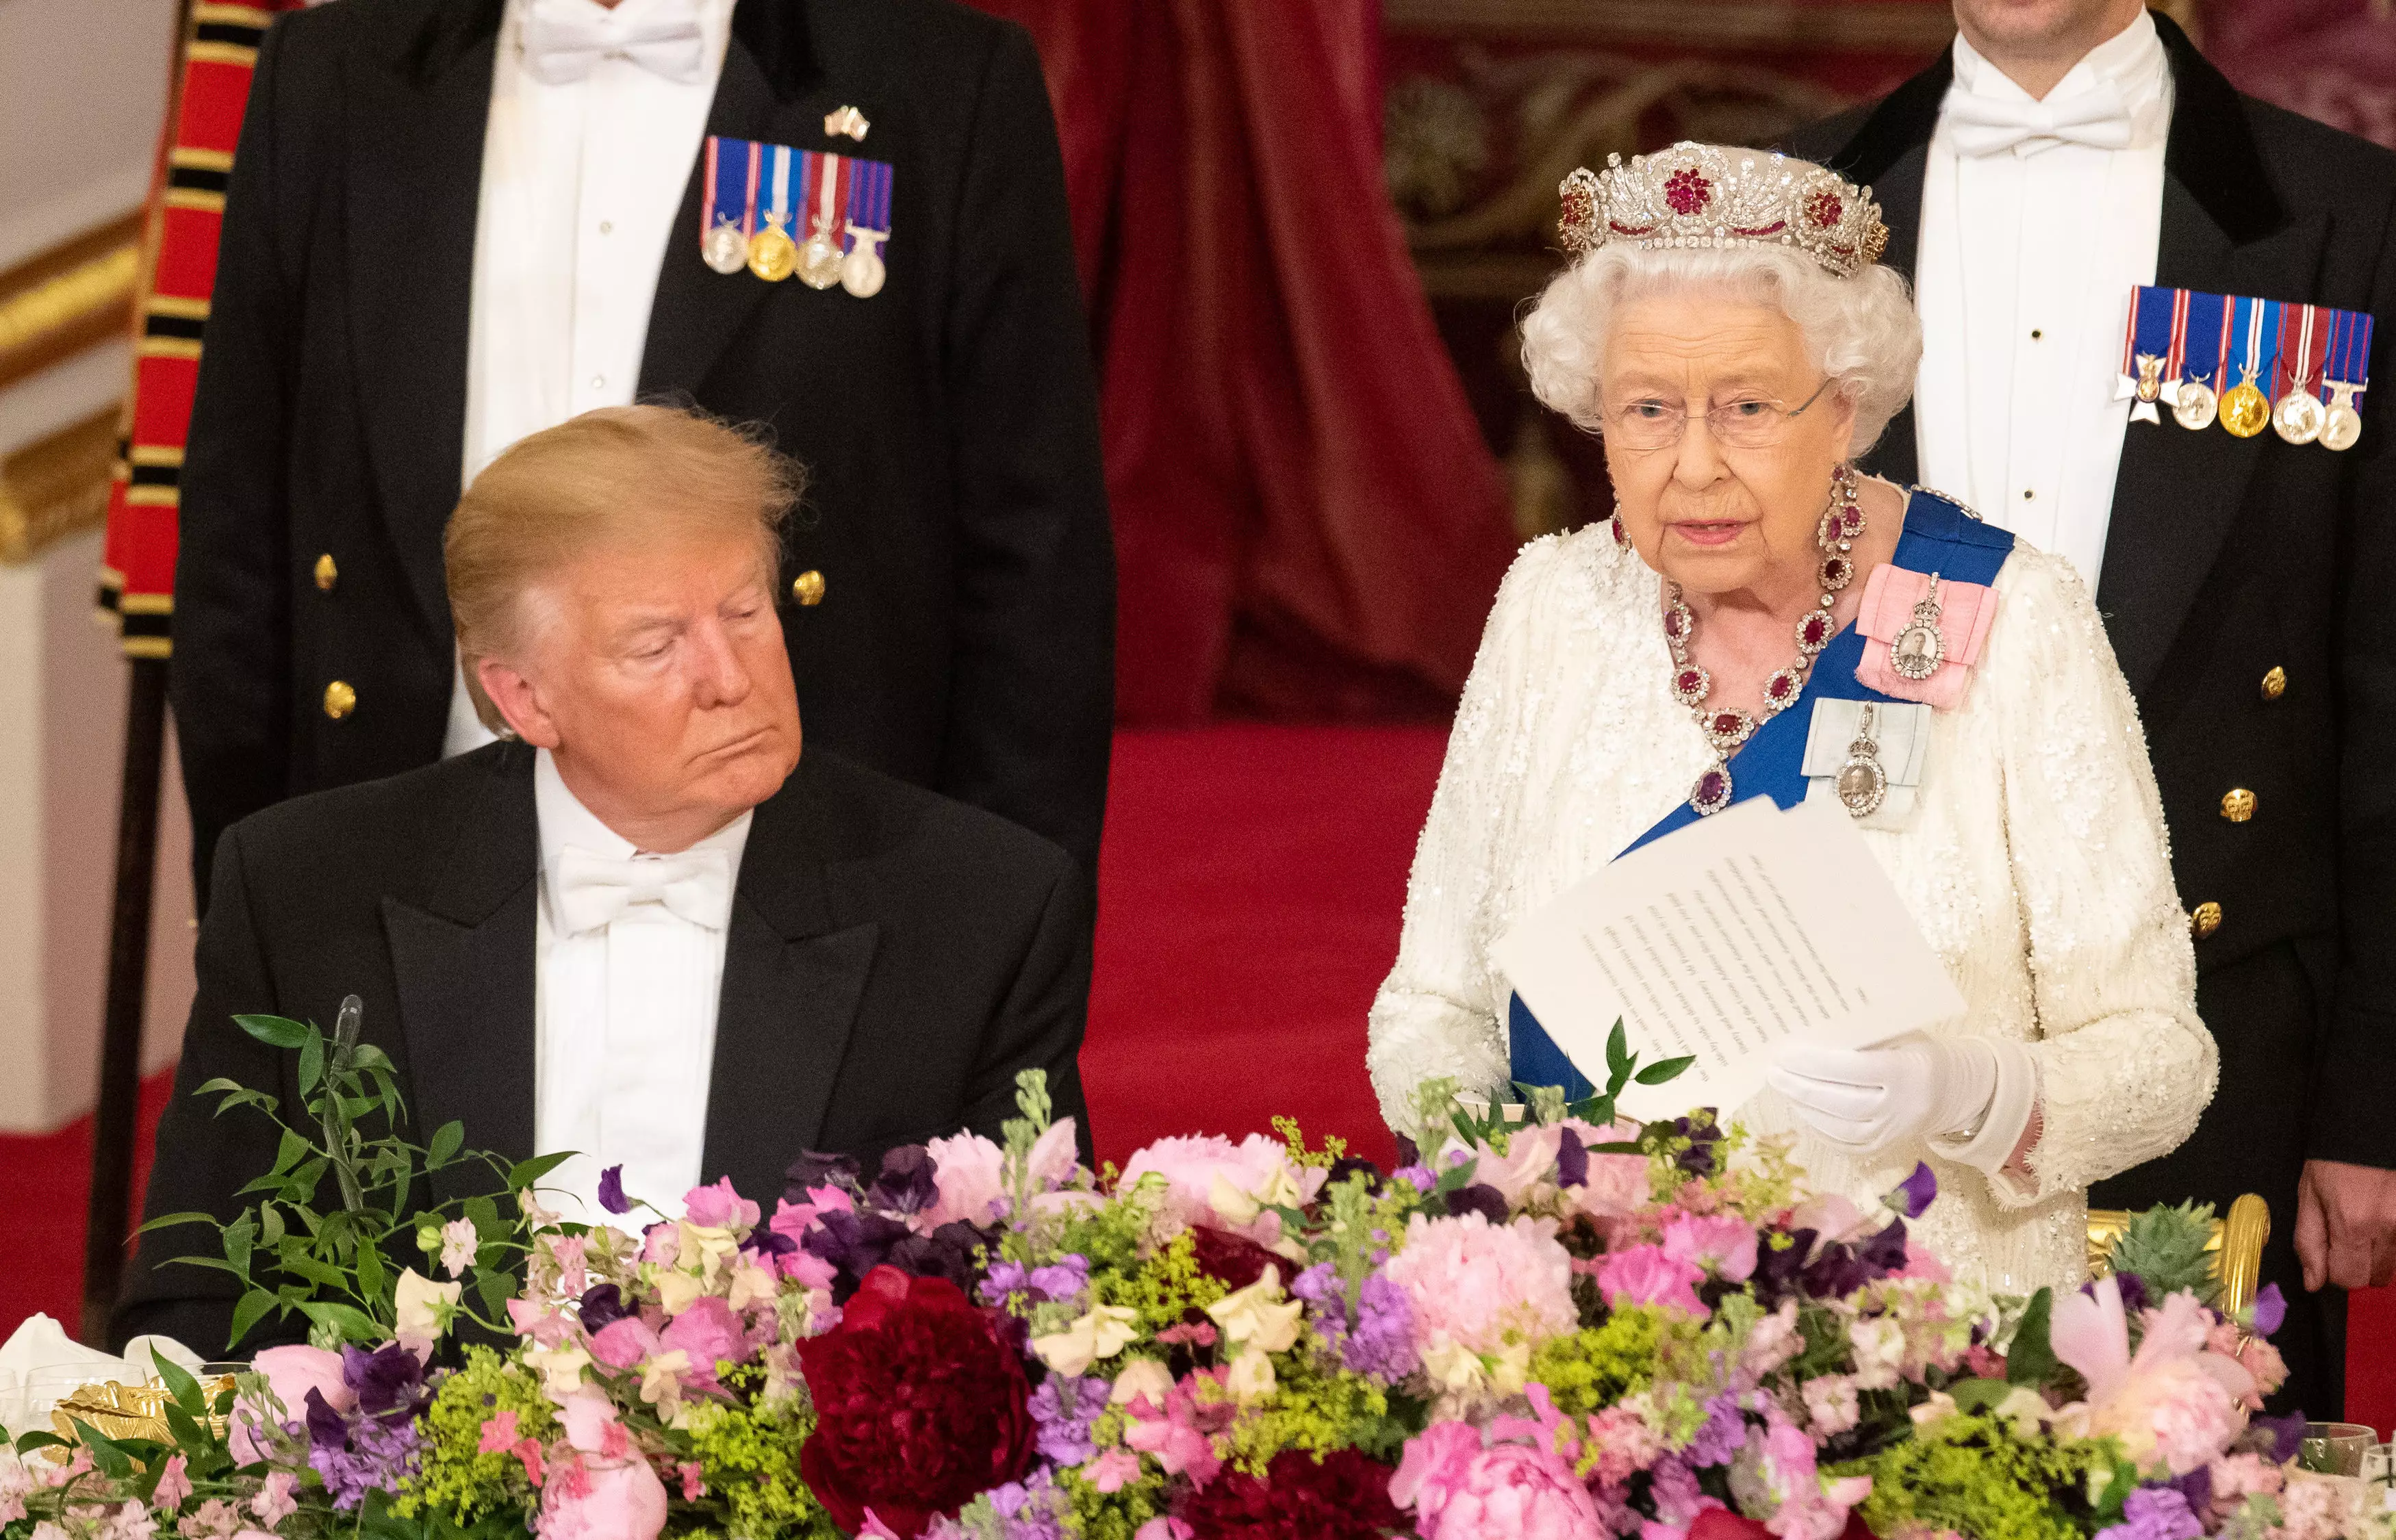 Donald Trump appeared to have a little micro-sleep during the Queen's speech.